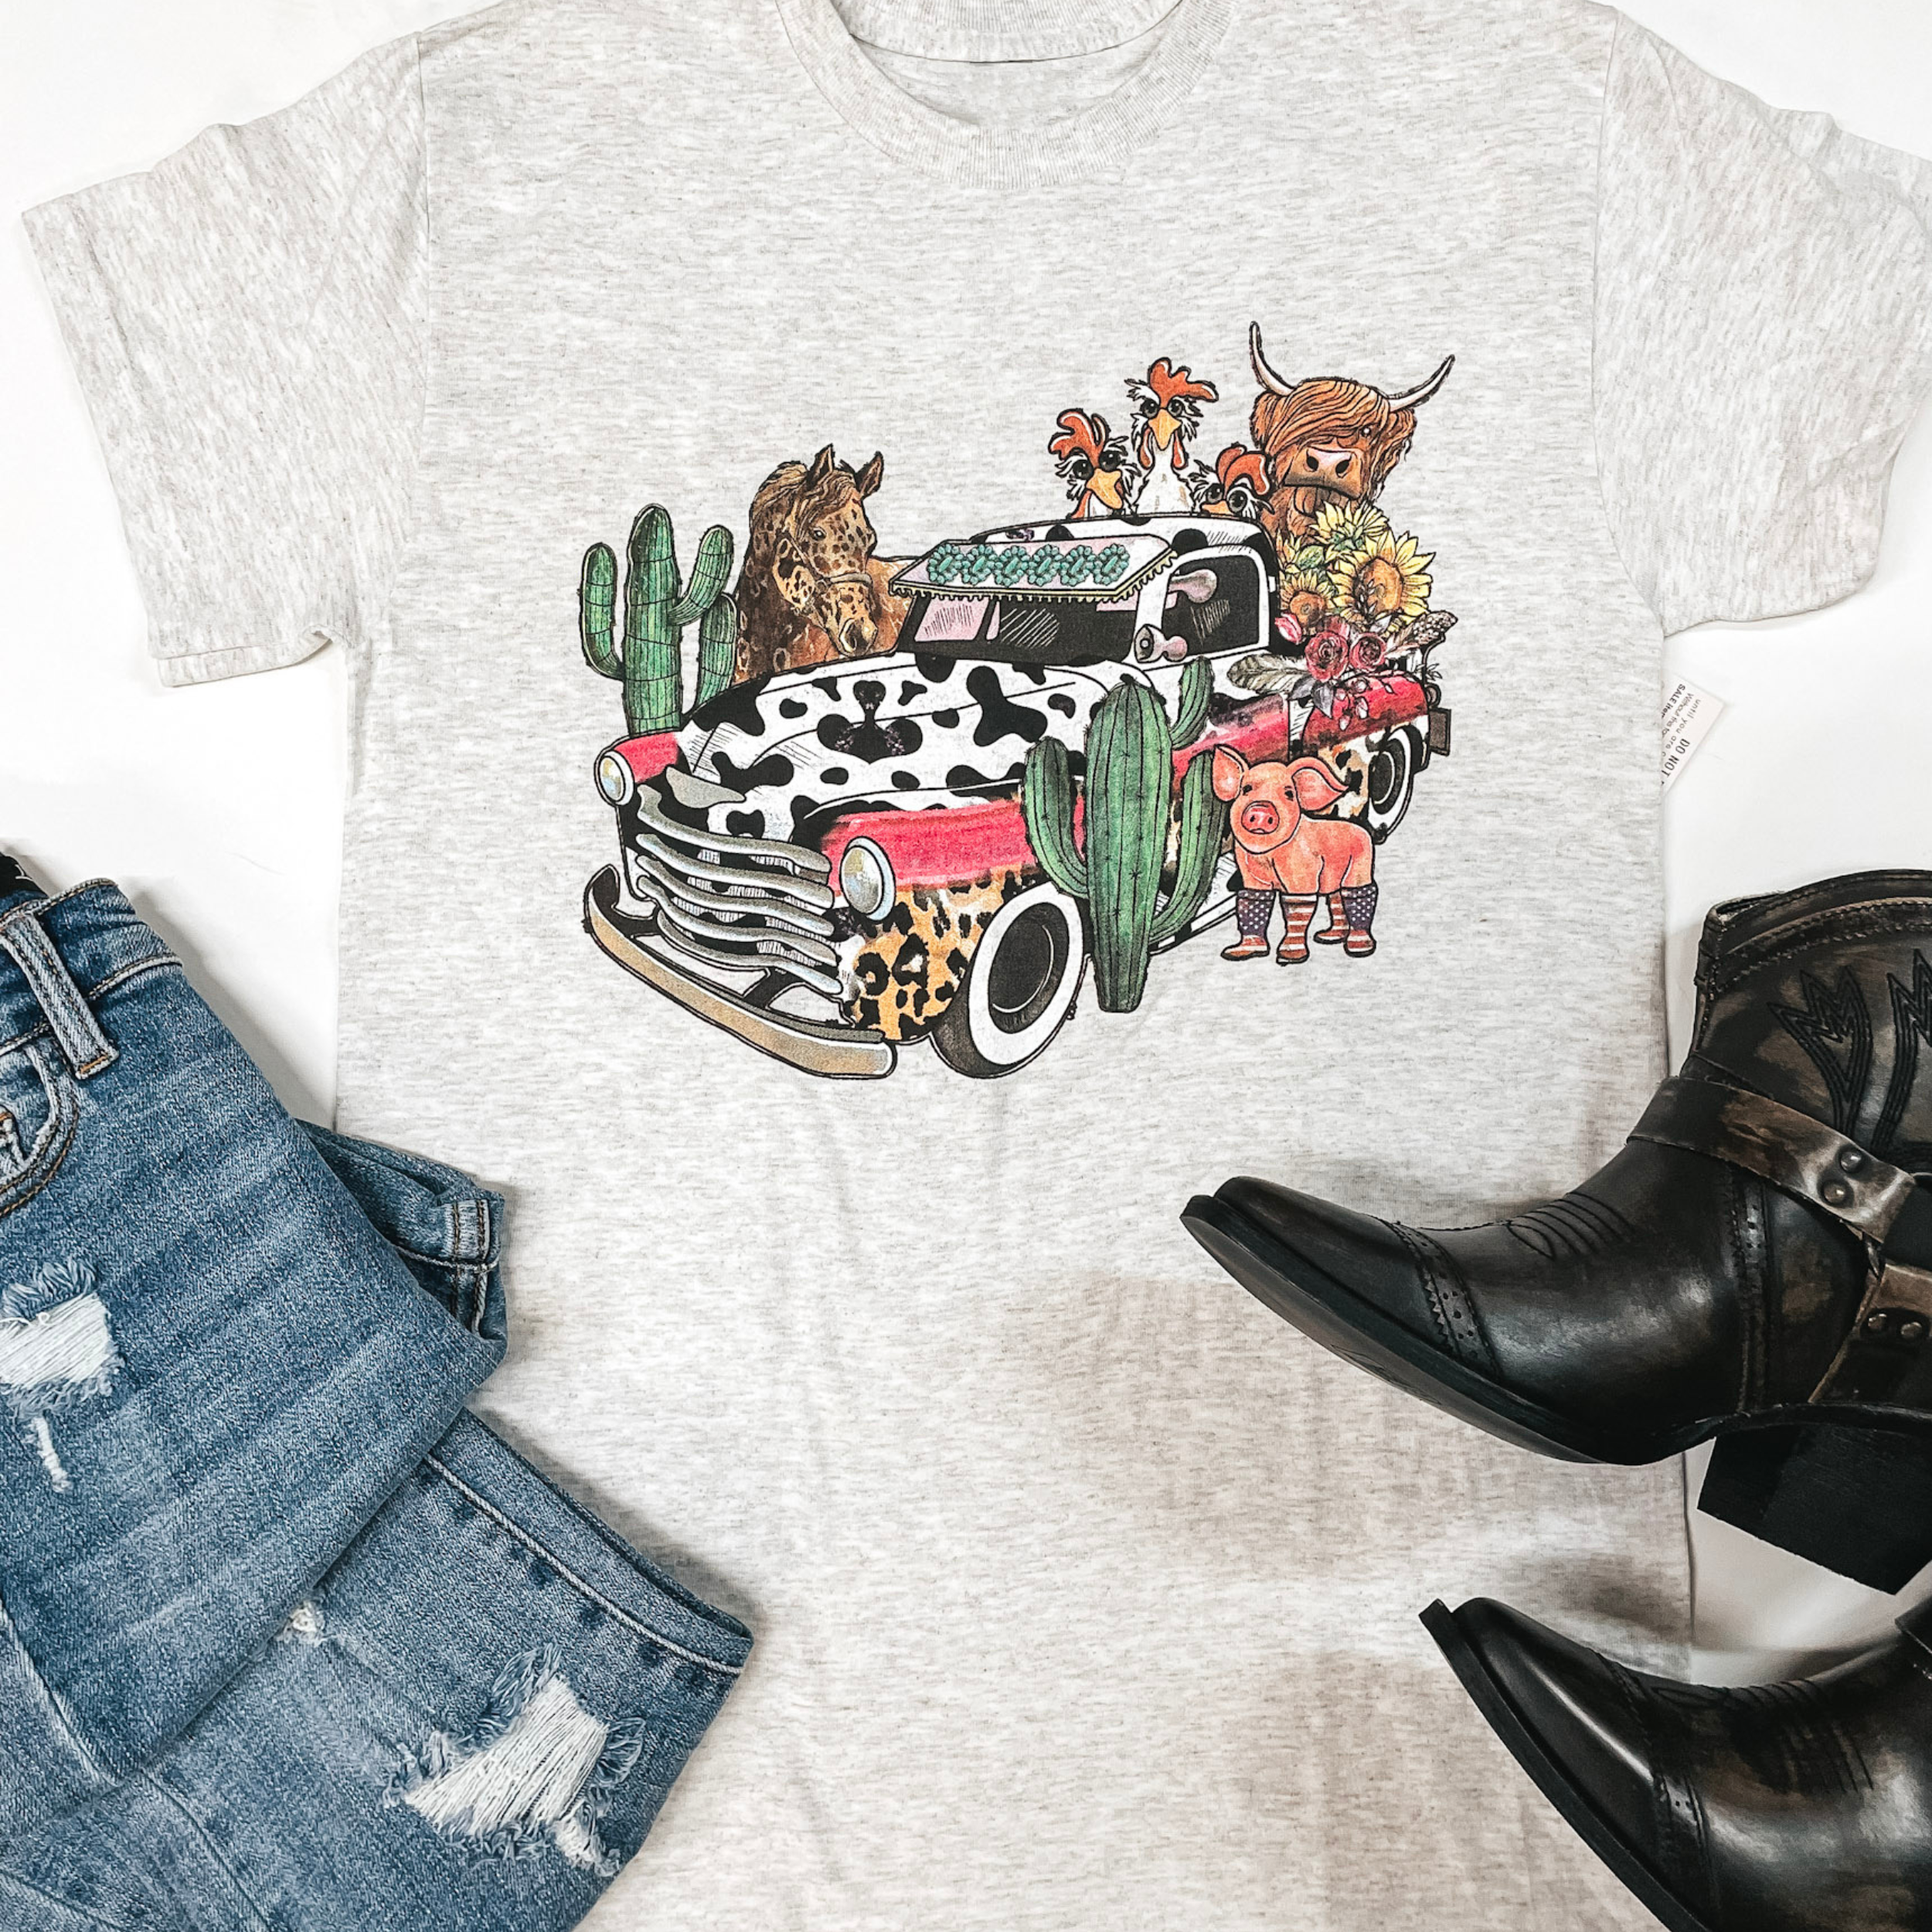 A gray tee is in the center of the picture on a white background. In the center of the tee is a cow-print truck loaded with cows, chickens, pigs and sunflowers. Cactus stands to the left of the truck. Light wash jeans are placed on the bottom left side of the picture and black boots are placed on thee bottom right of the picture/. 